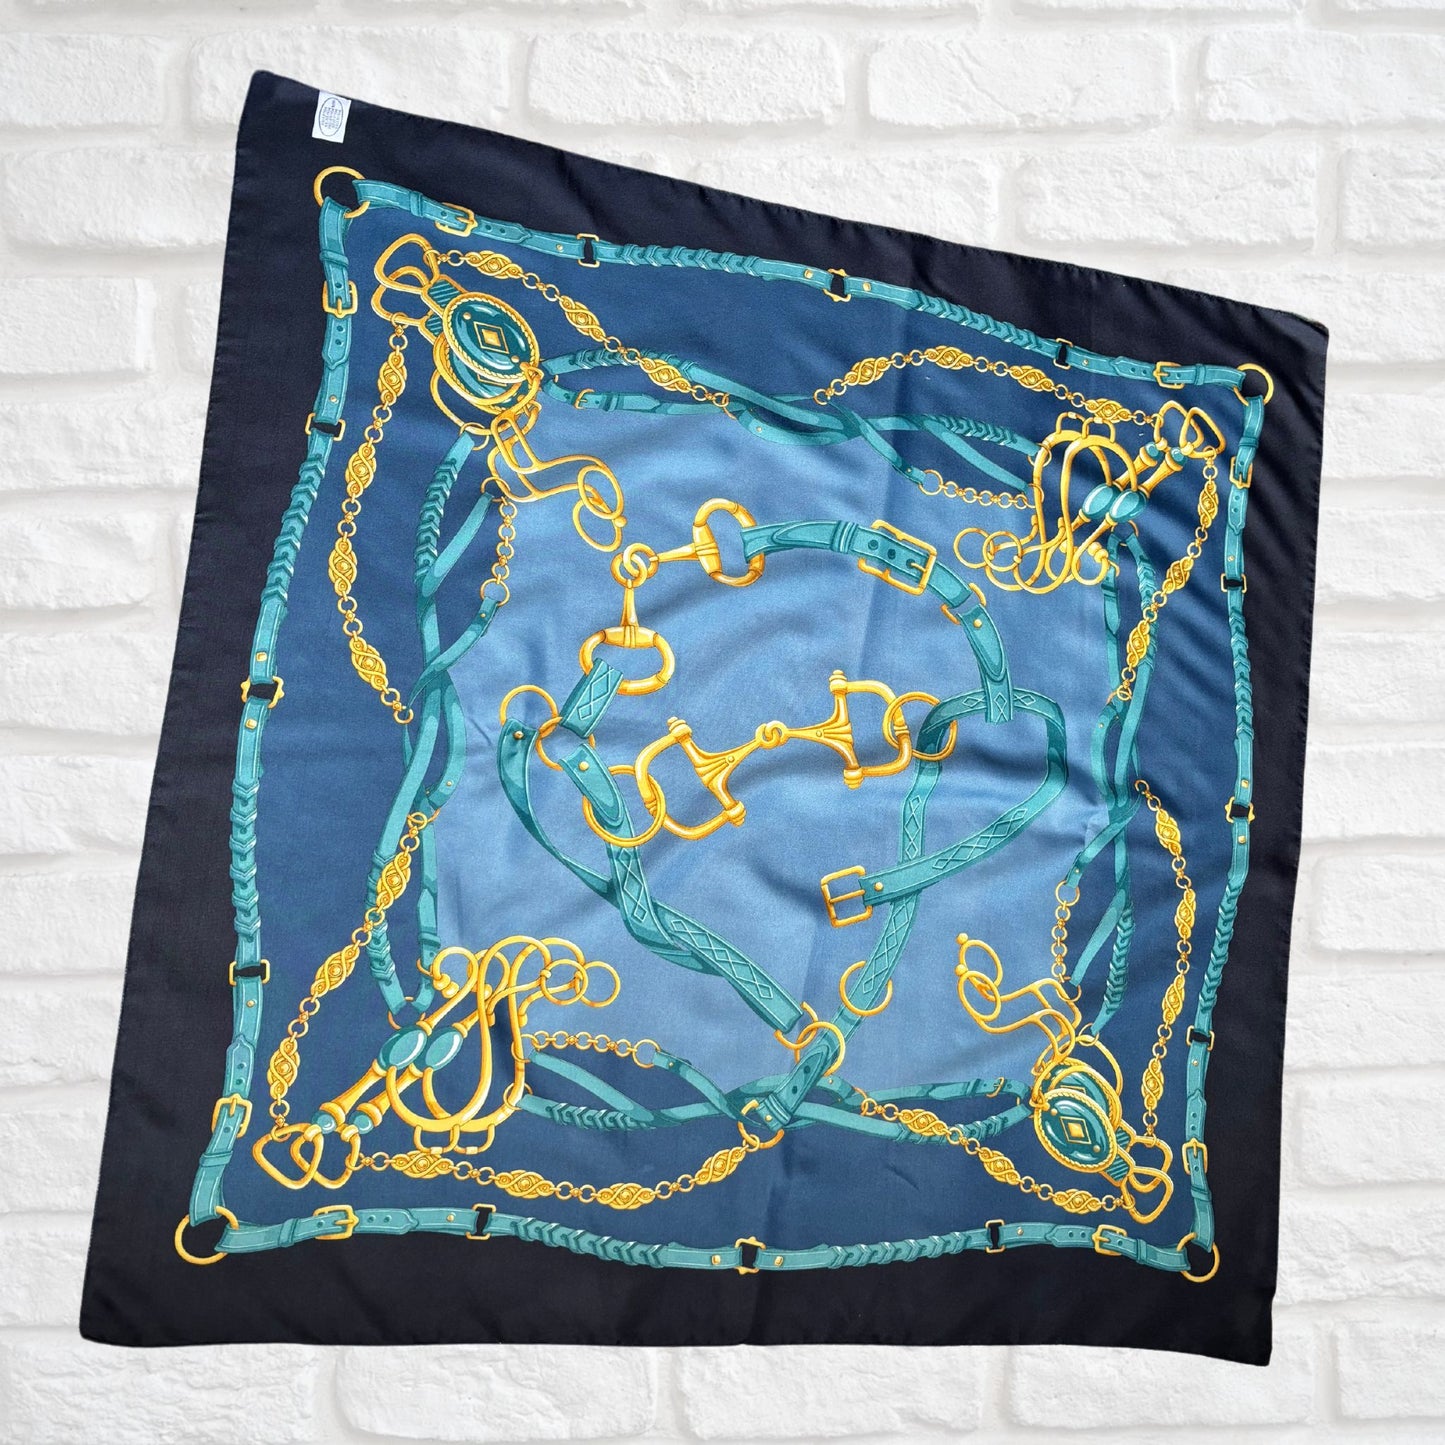 Blue and Gold Equestrian Style Large Square Vintage Scarf. Great Gift idea